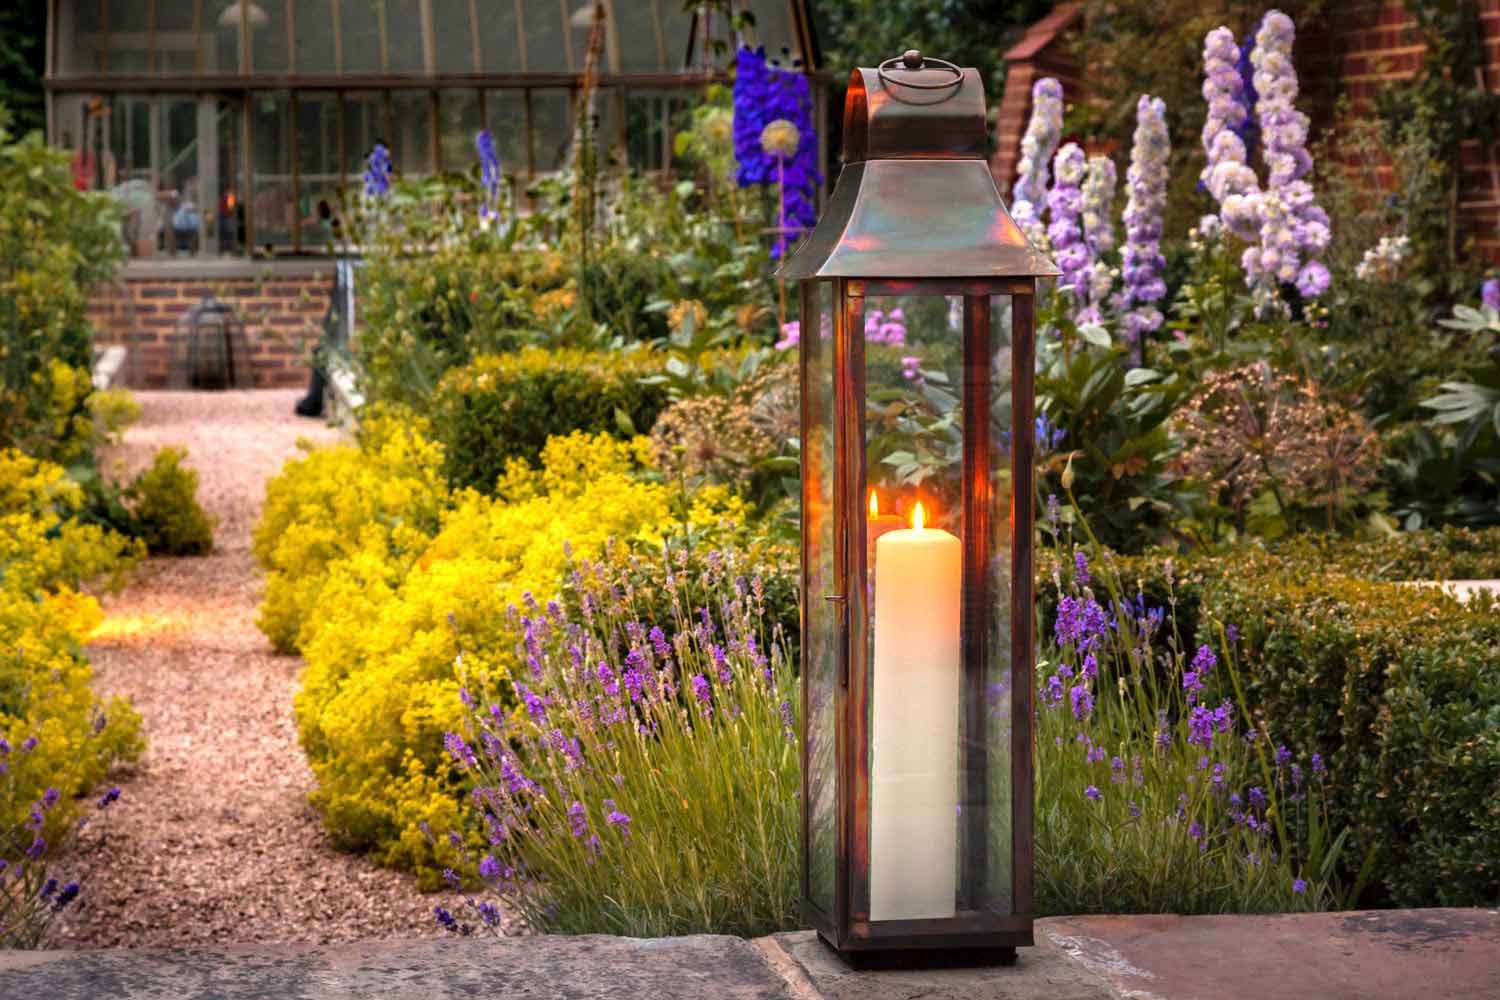 Garden lamp on a wall. Rae Wilkinson Garden and Landscape Design Surrey, Sussex, Hampshire, London, South-East England